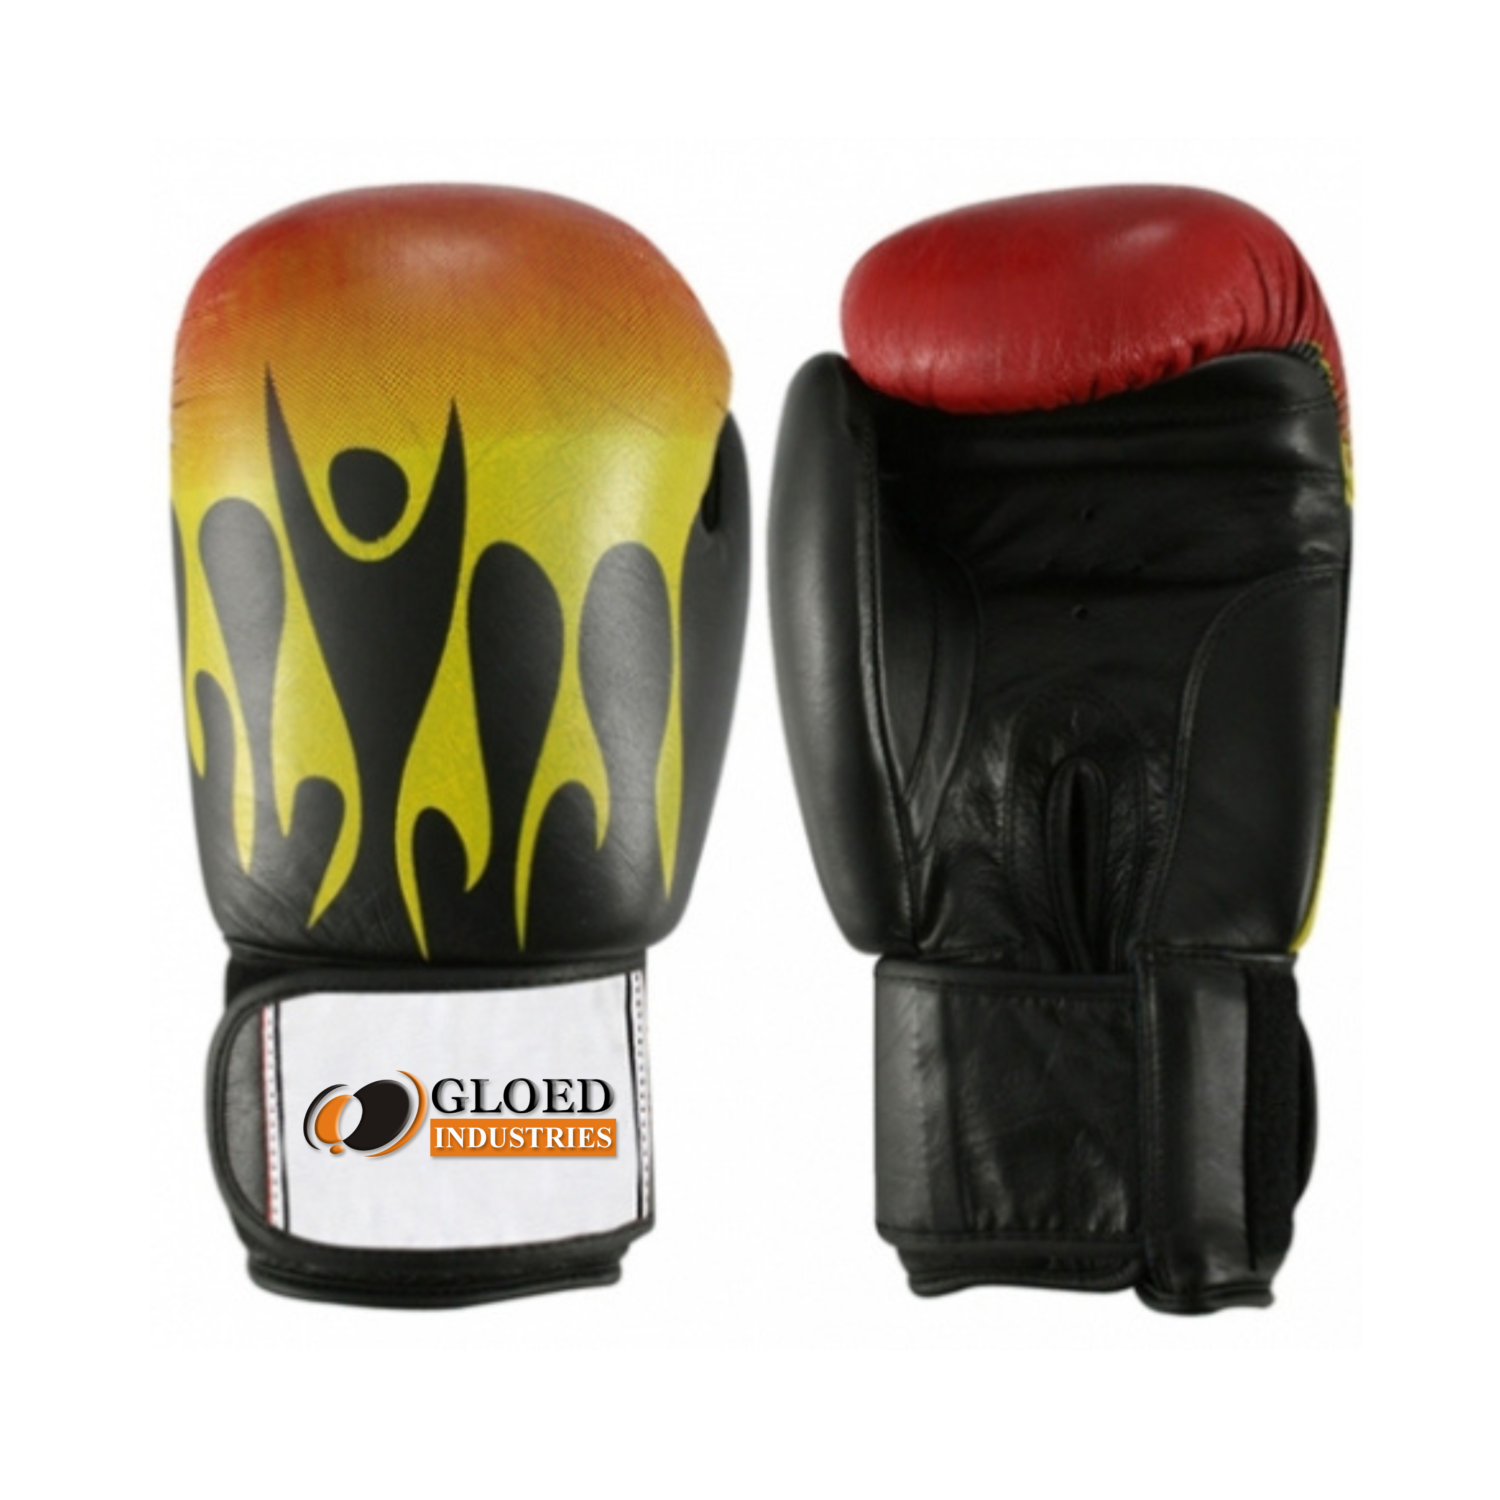 customized Bag Boxing Gloves